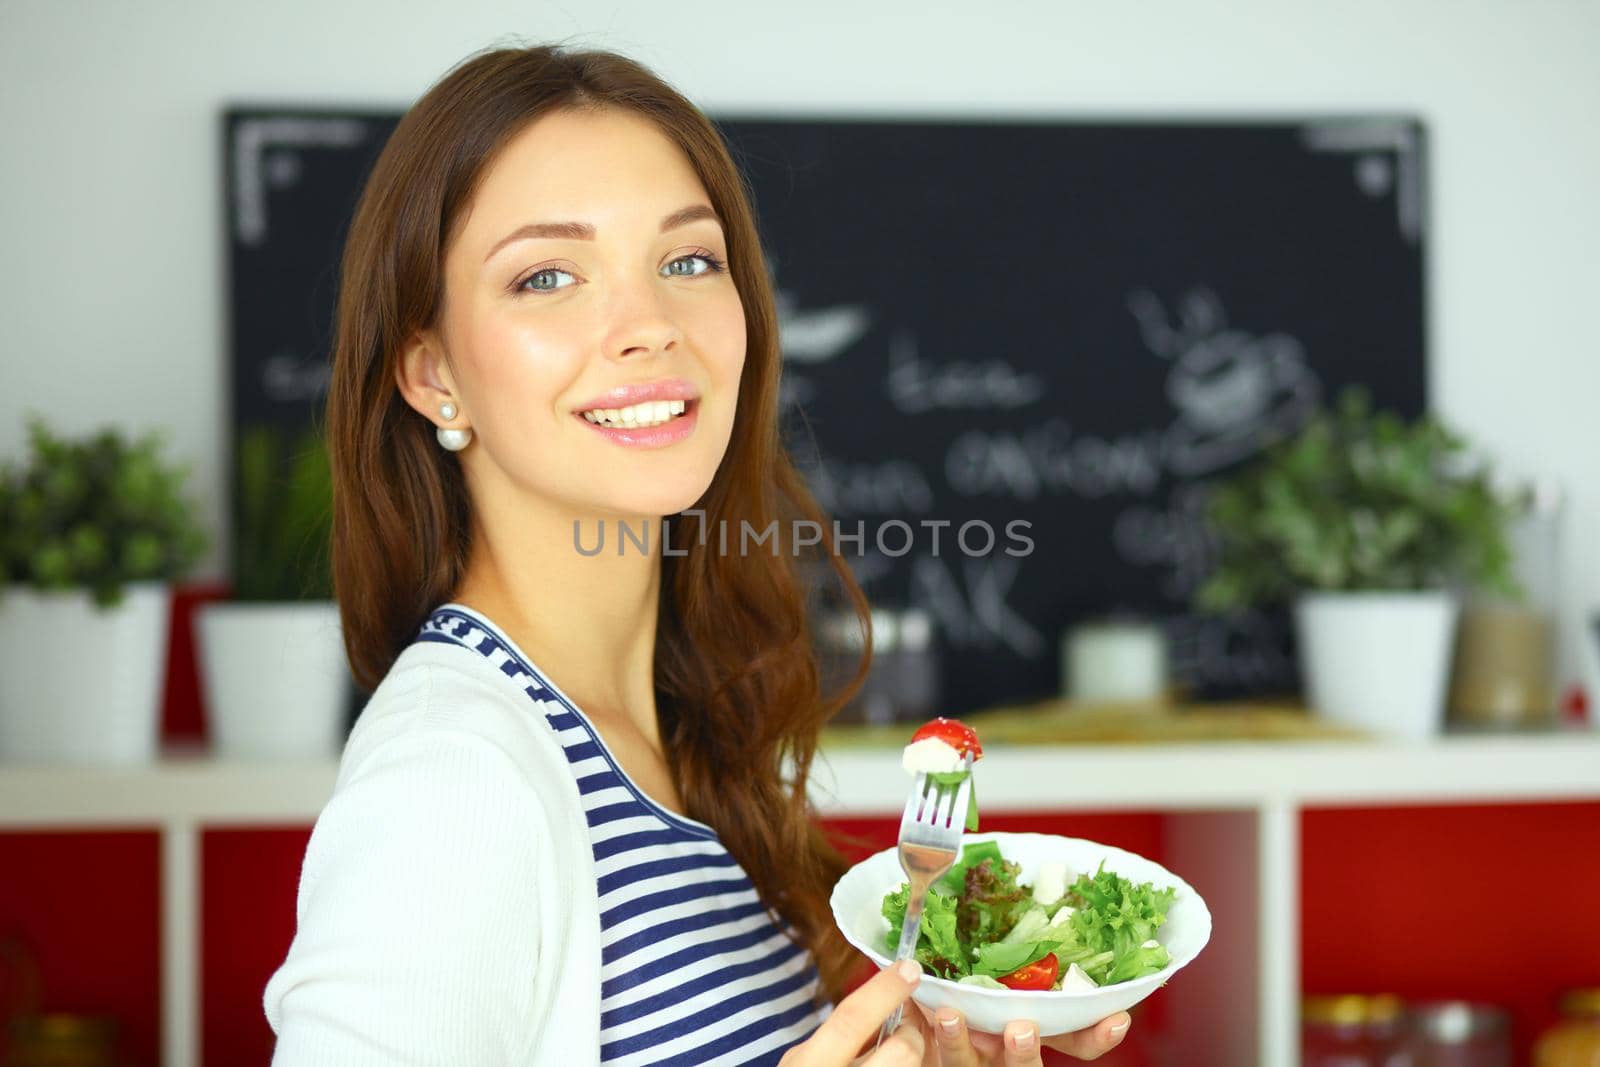 Young woman eating salad and holding a mixed .